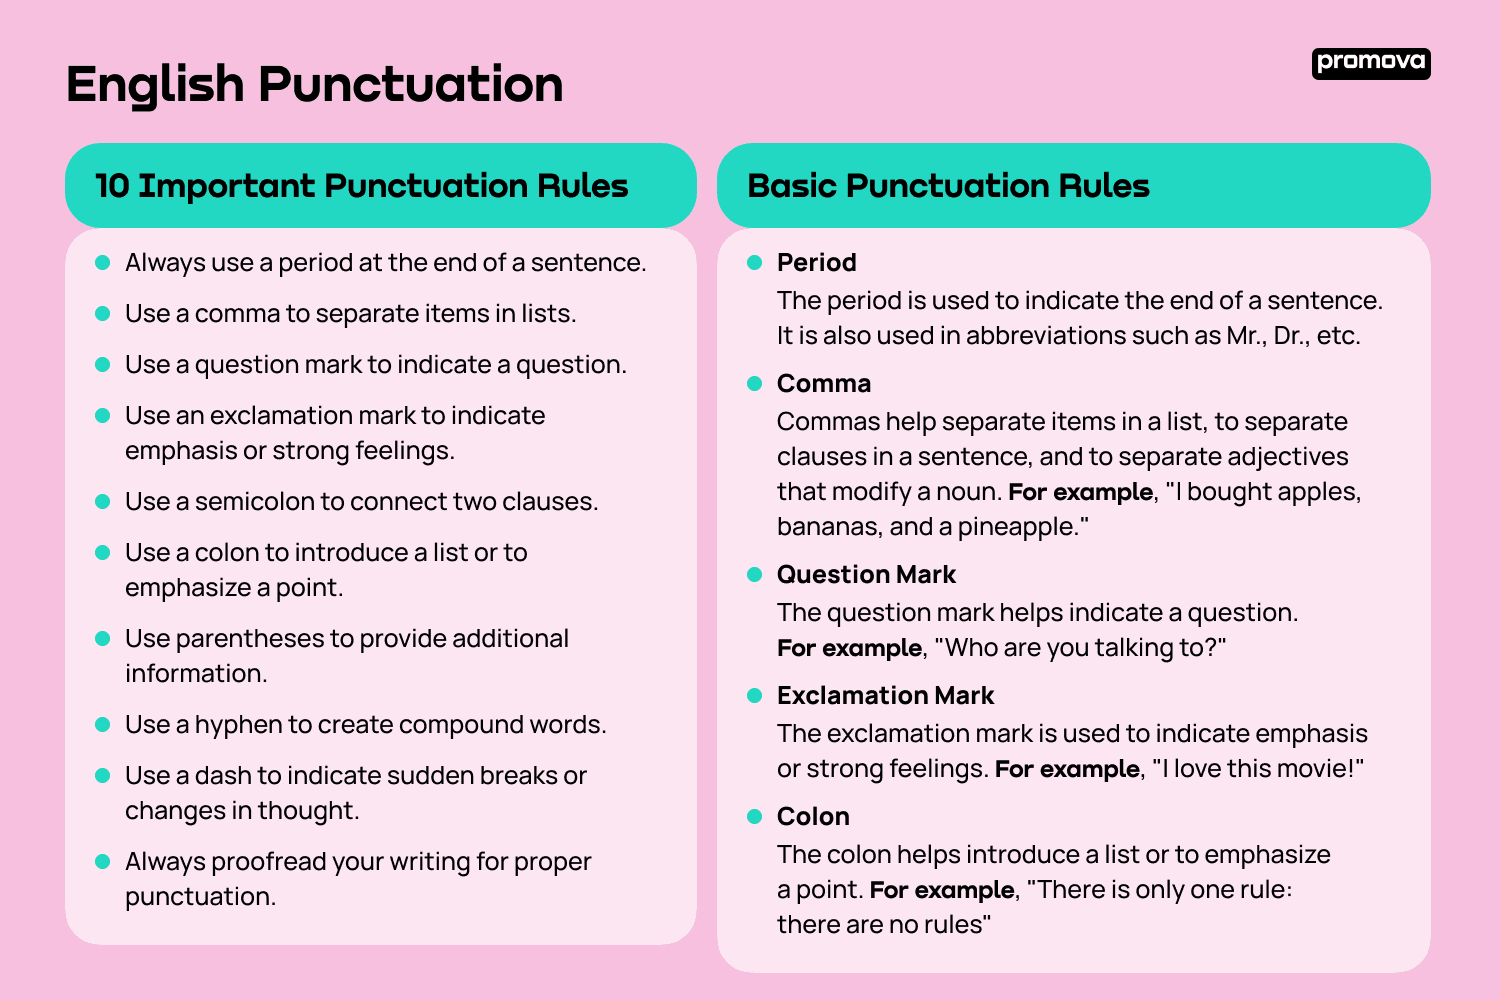 10 Important Punctuation Rules